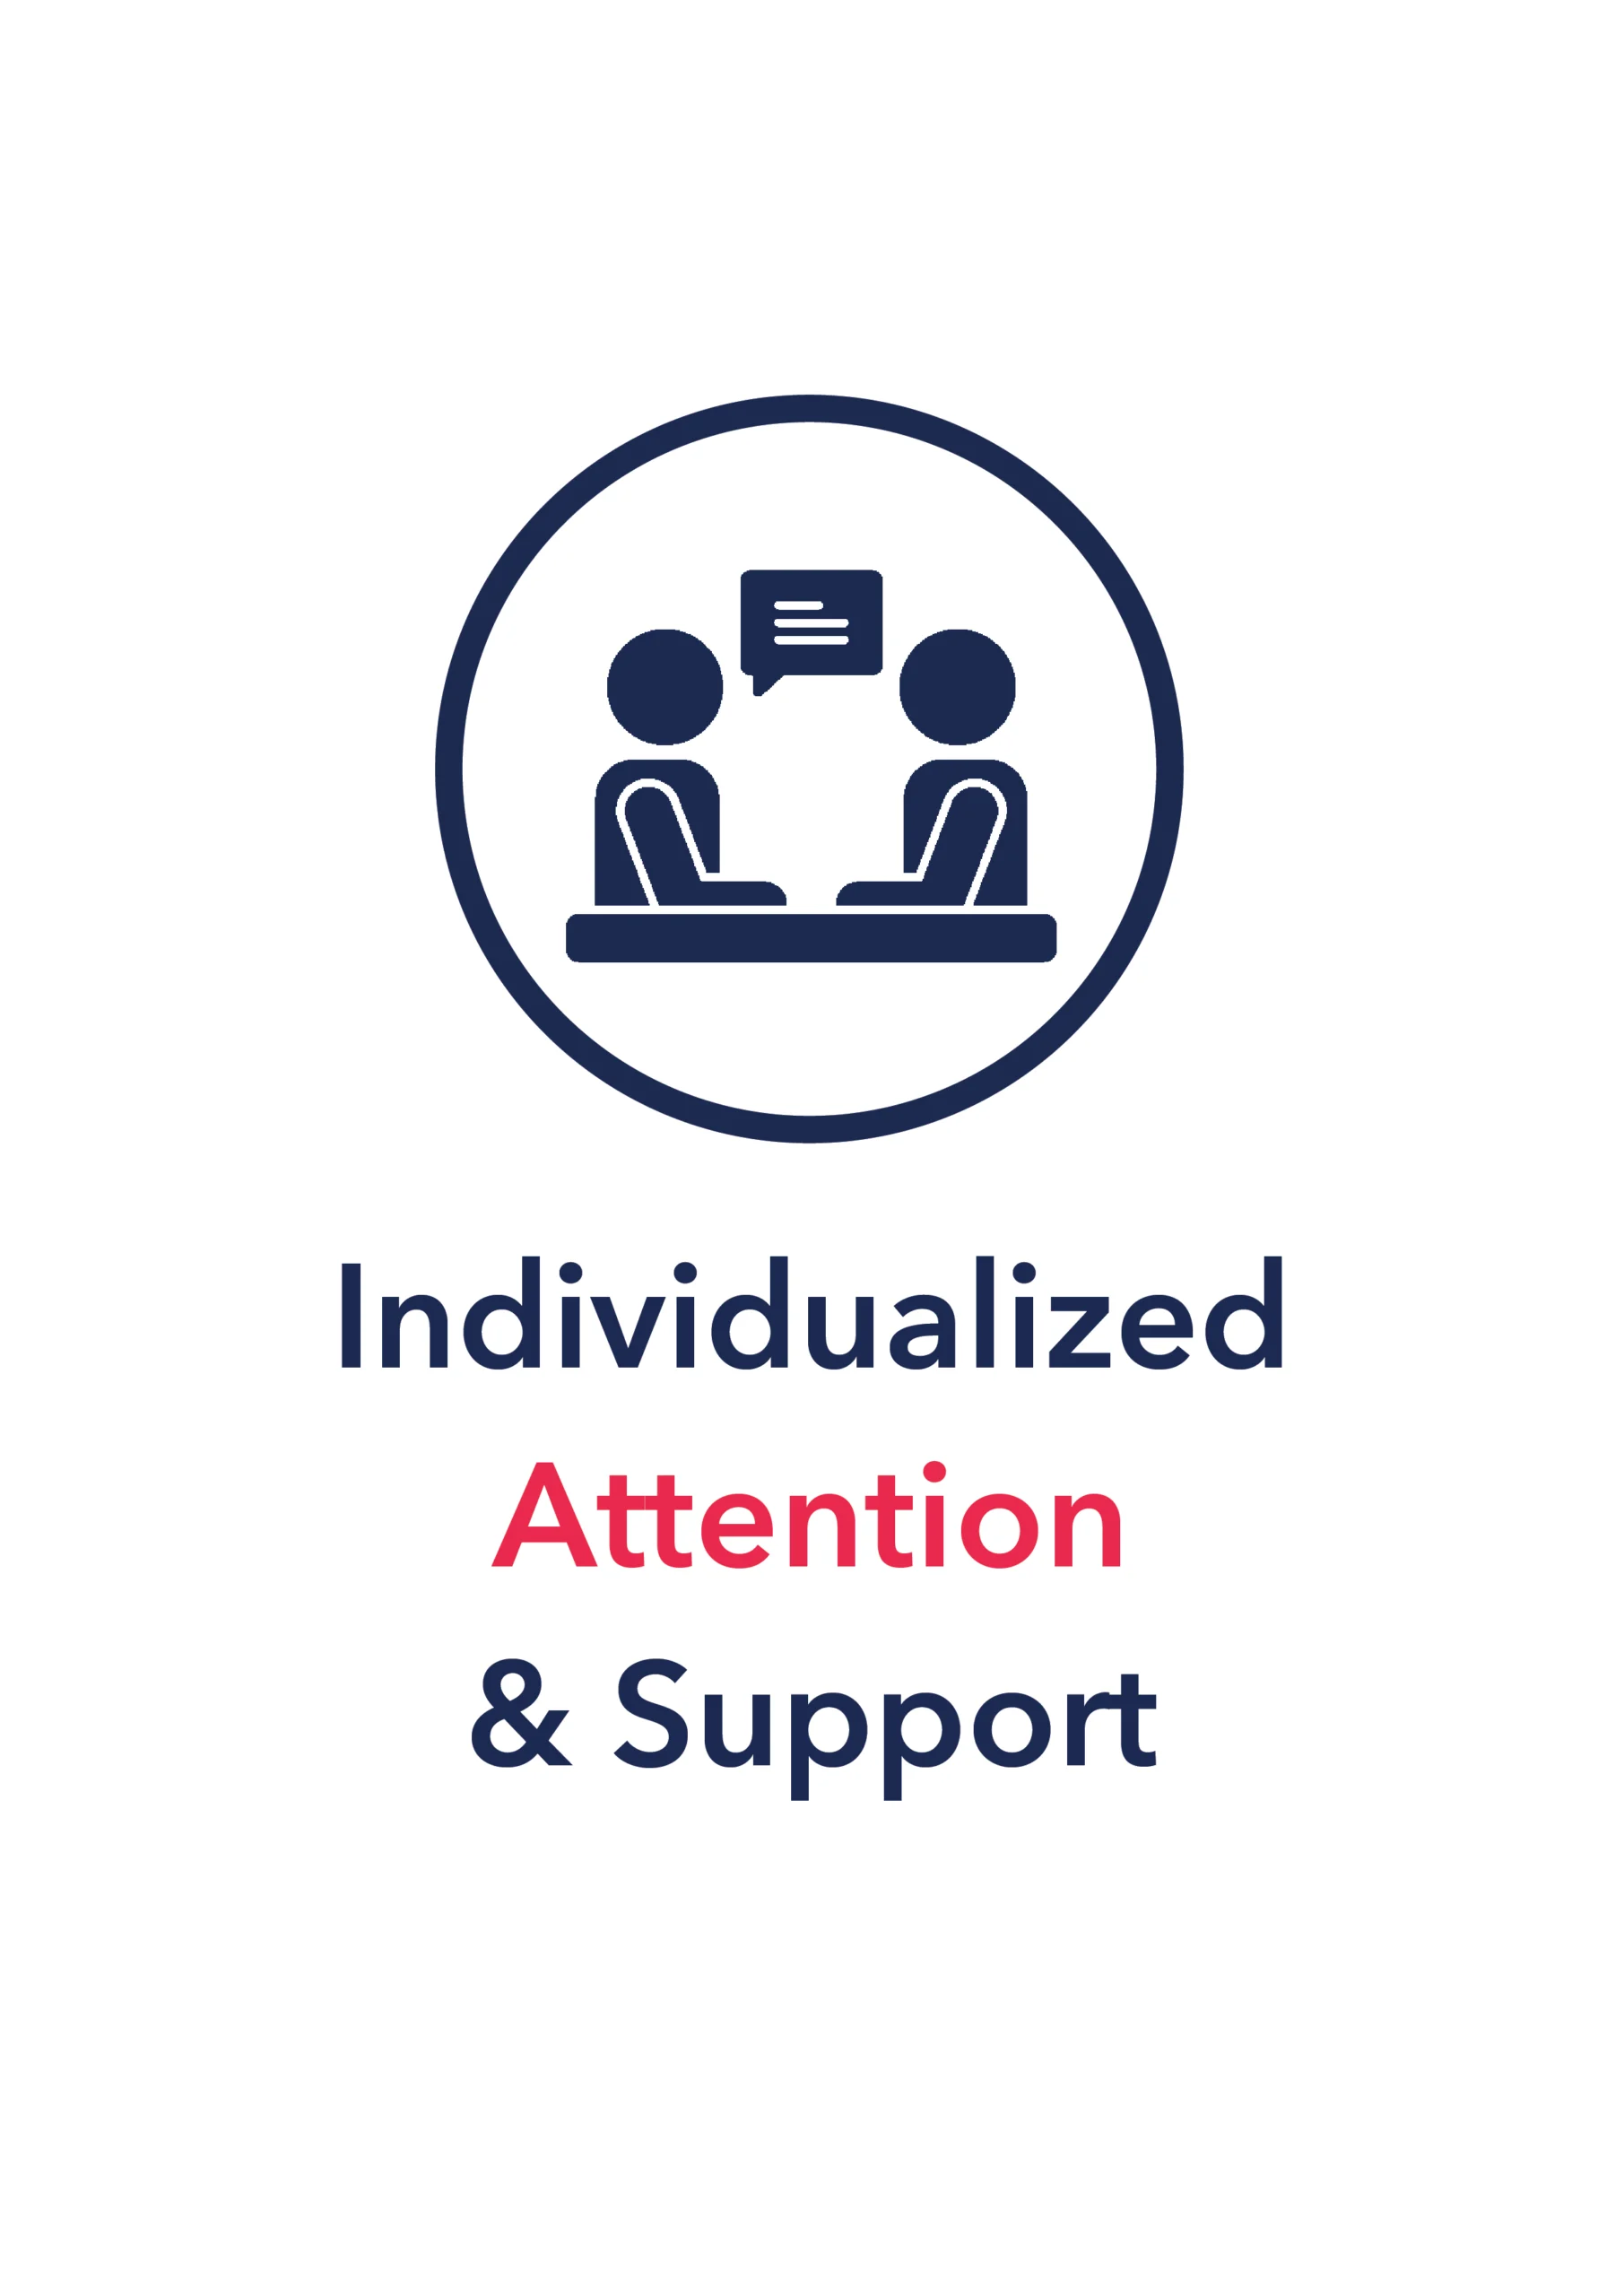 individualized attention & Support